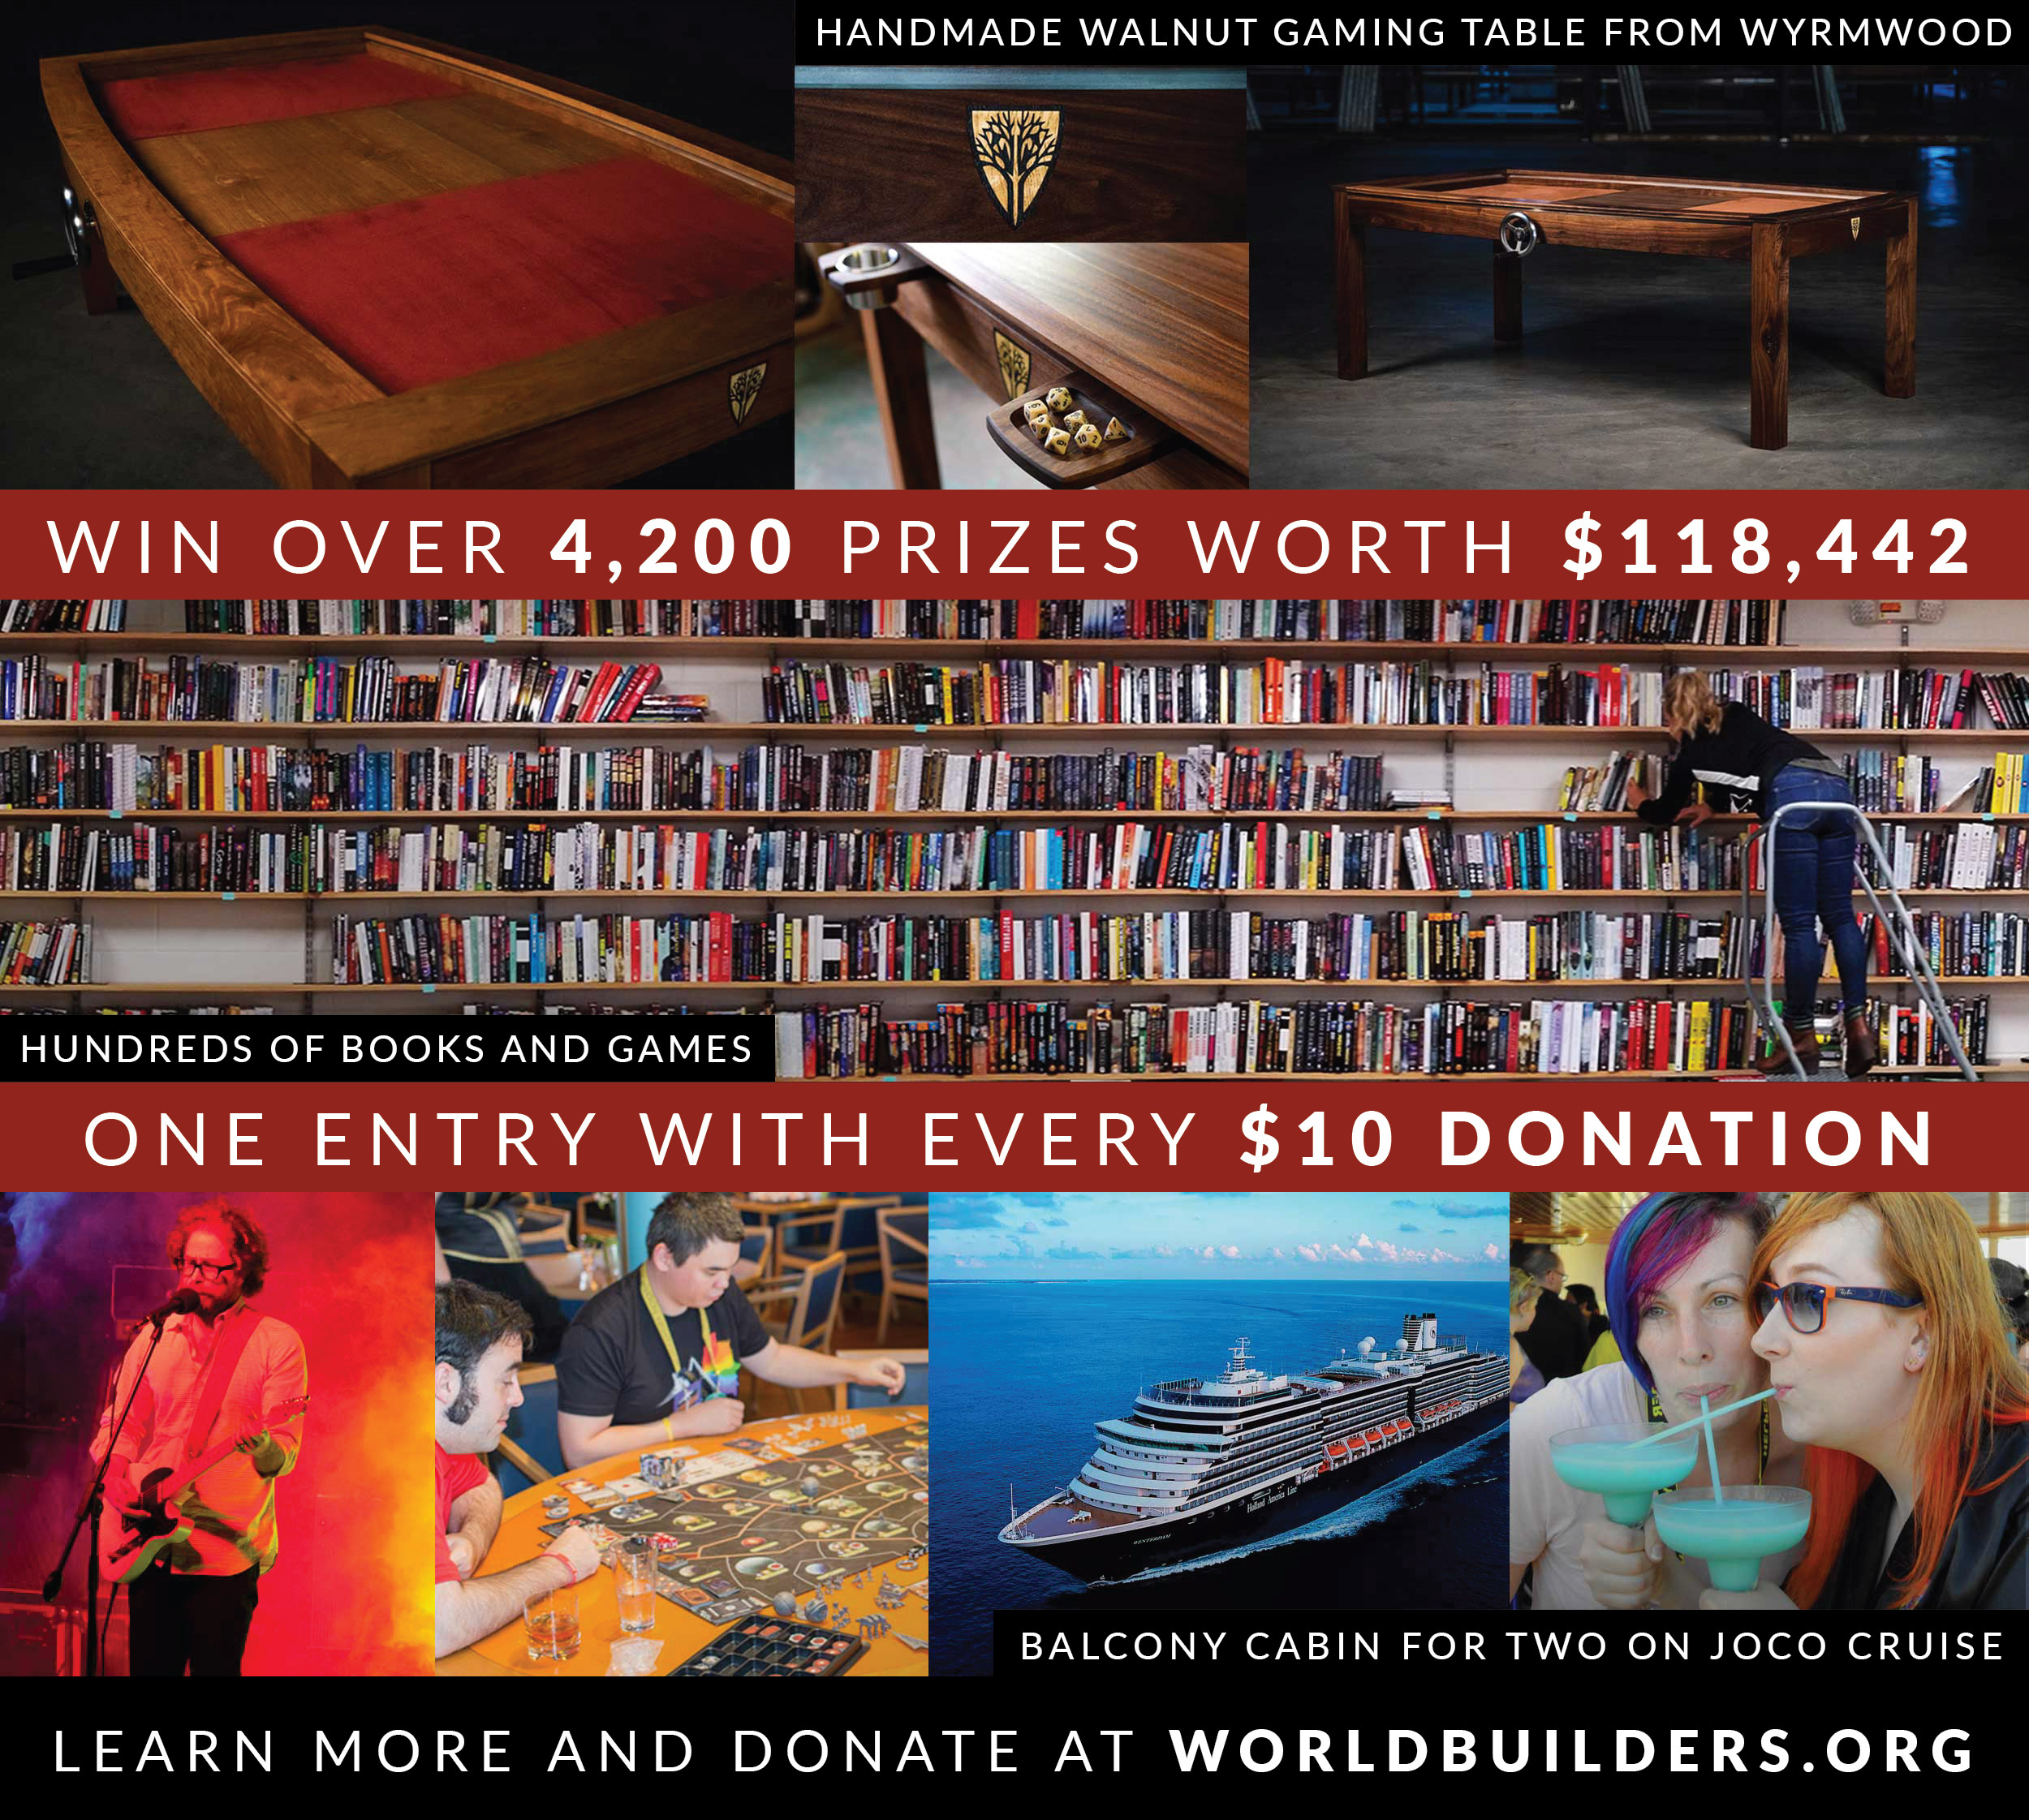 Fundraising for Worldbuilders